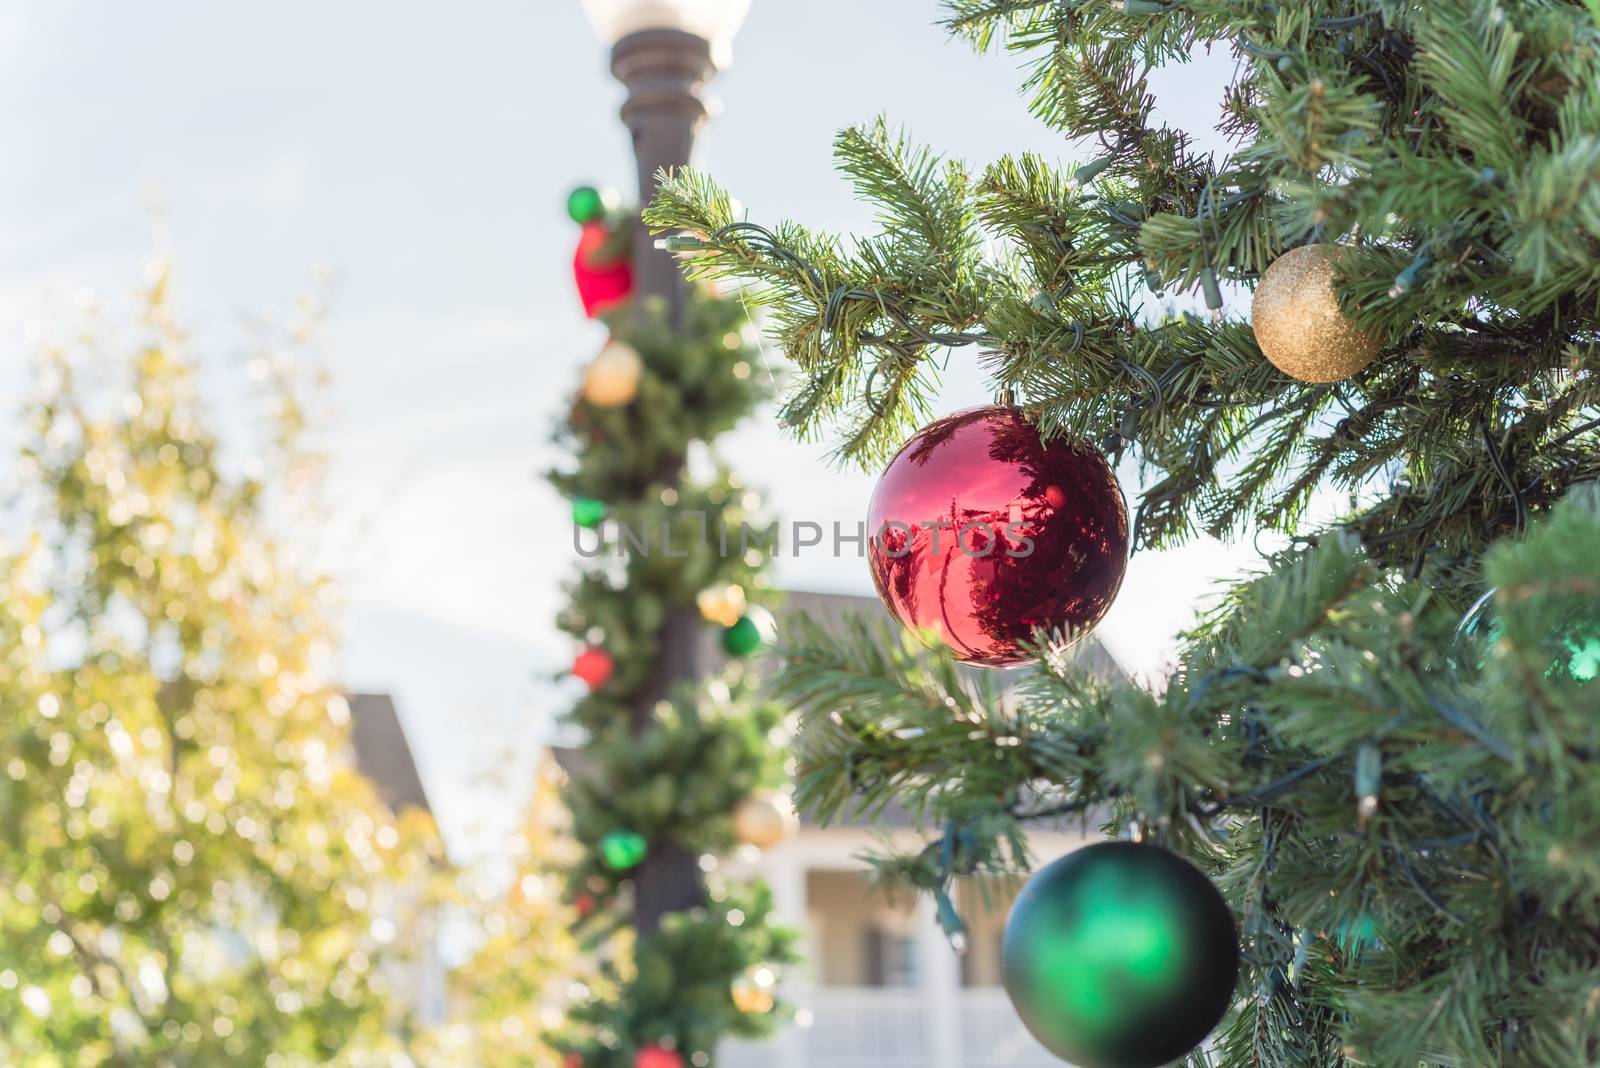 Beautiful Christmas ball hanging on pine branches at daytime light with two-story residential house in background. Baubles and spruce tree. Traditional artificial Xmas ornament near Dallas, Texas